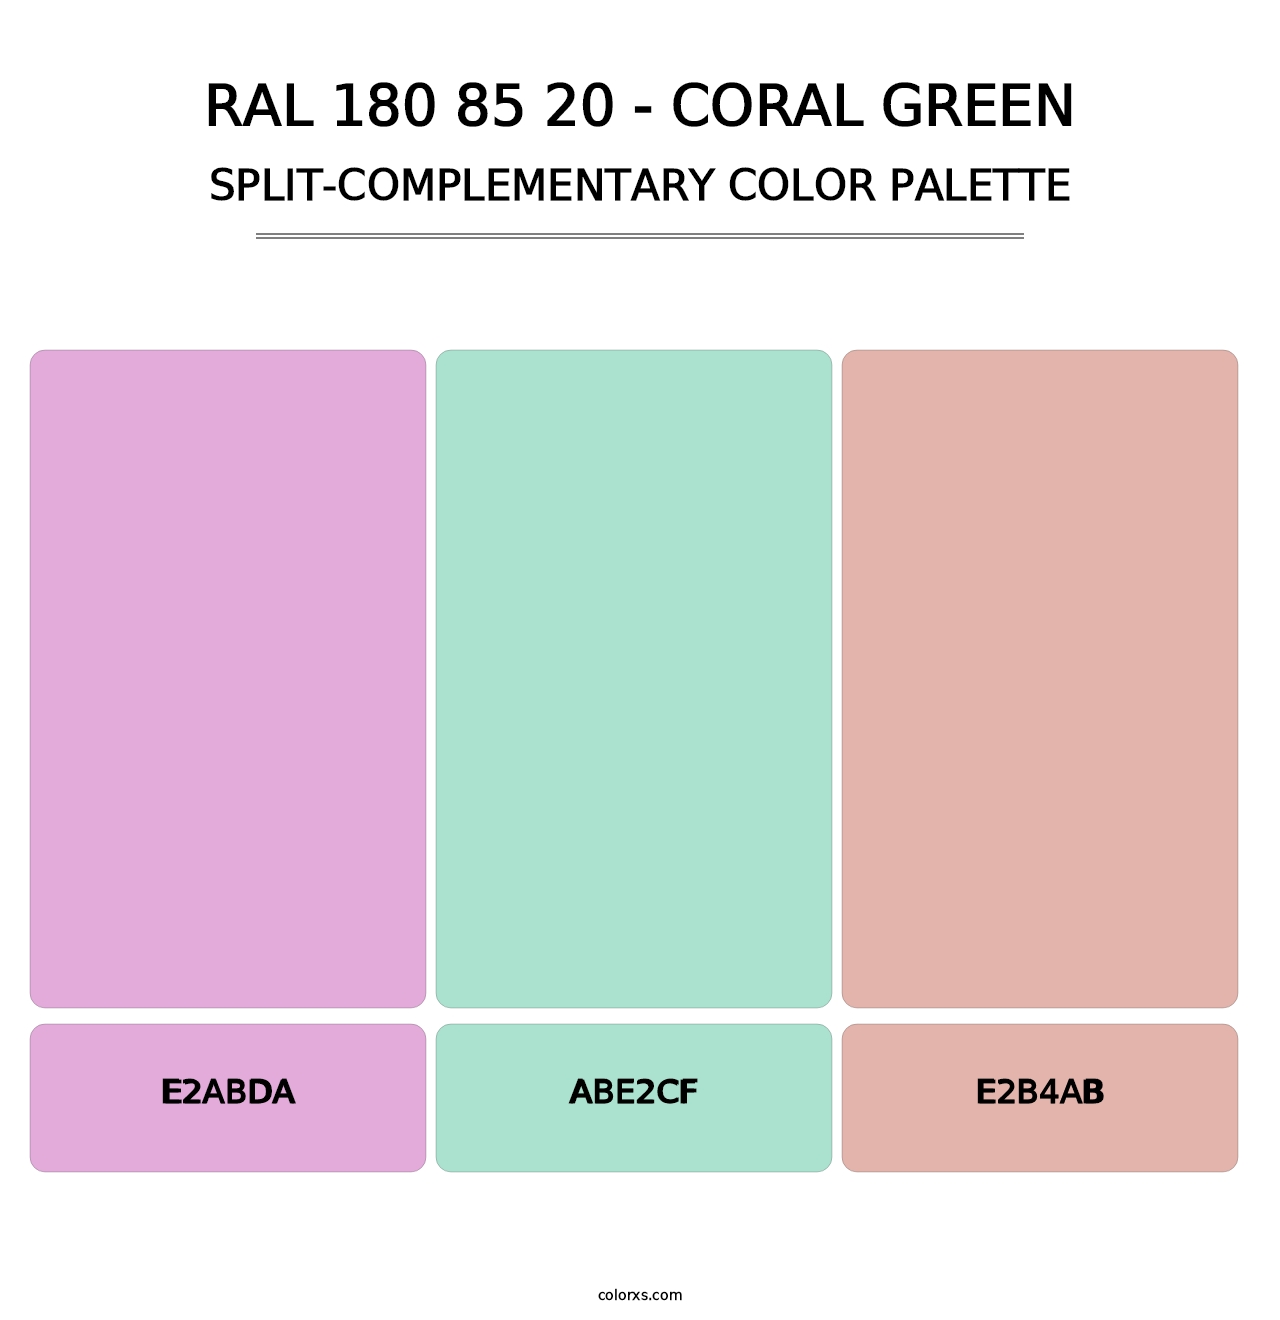 RAL 180 85 20 - Coral Green - Split-Complementary Color Palette